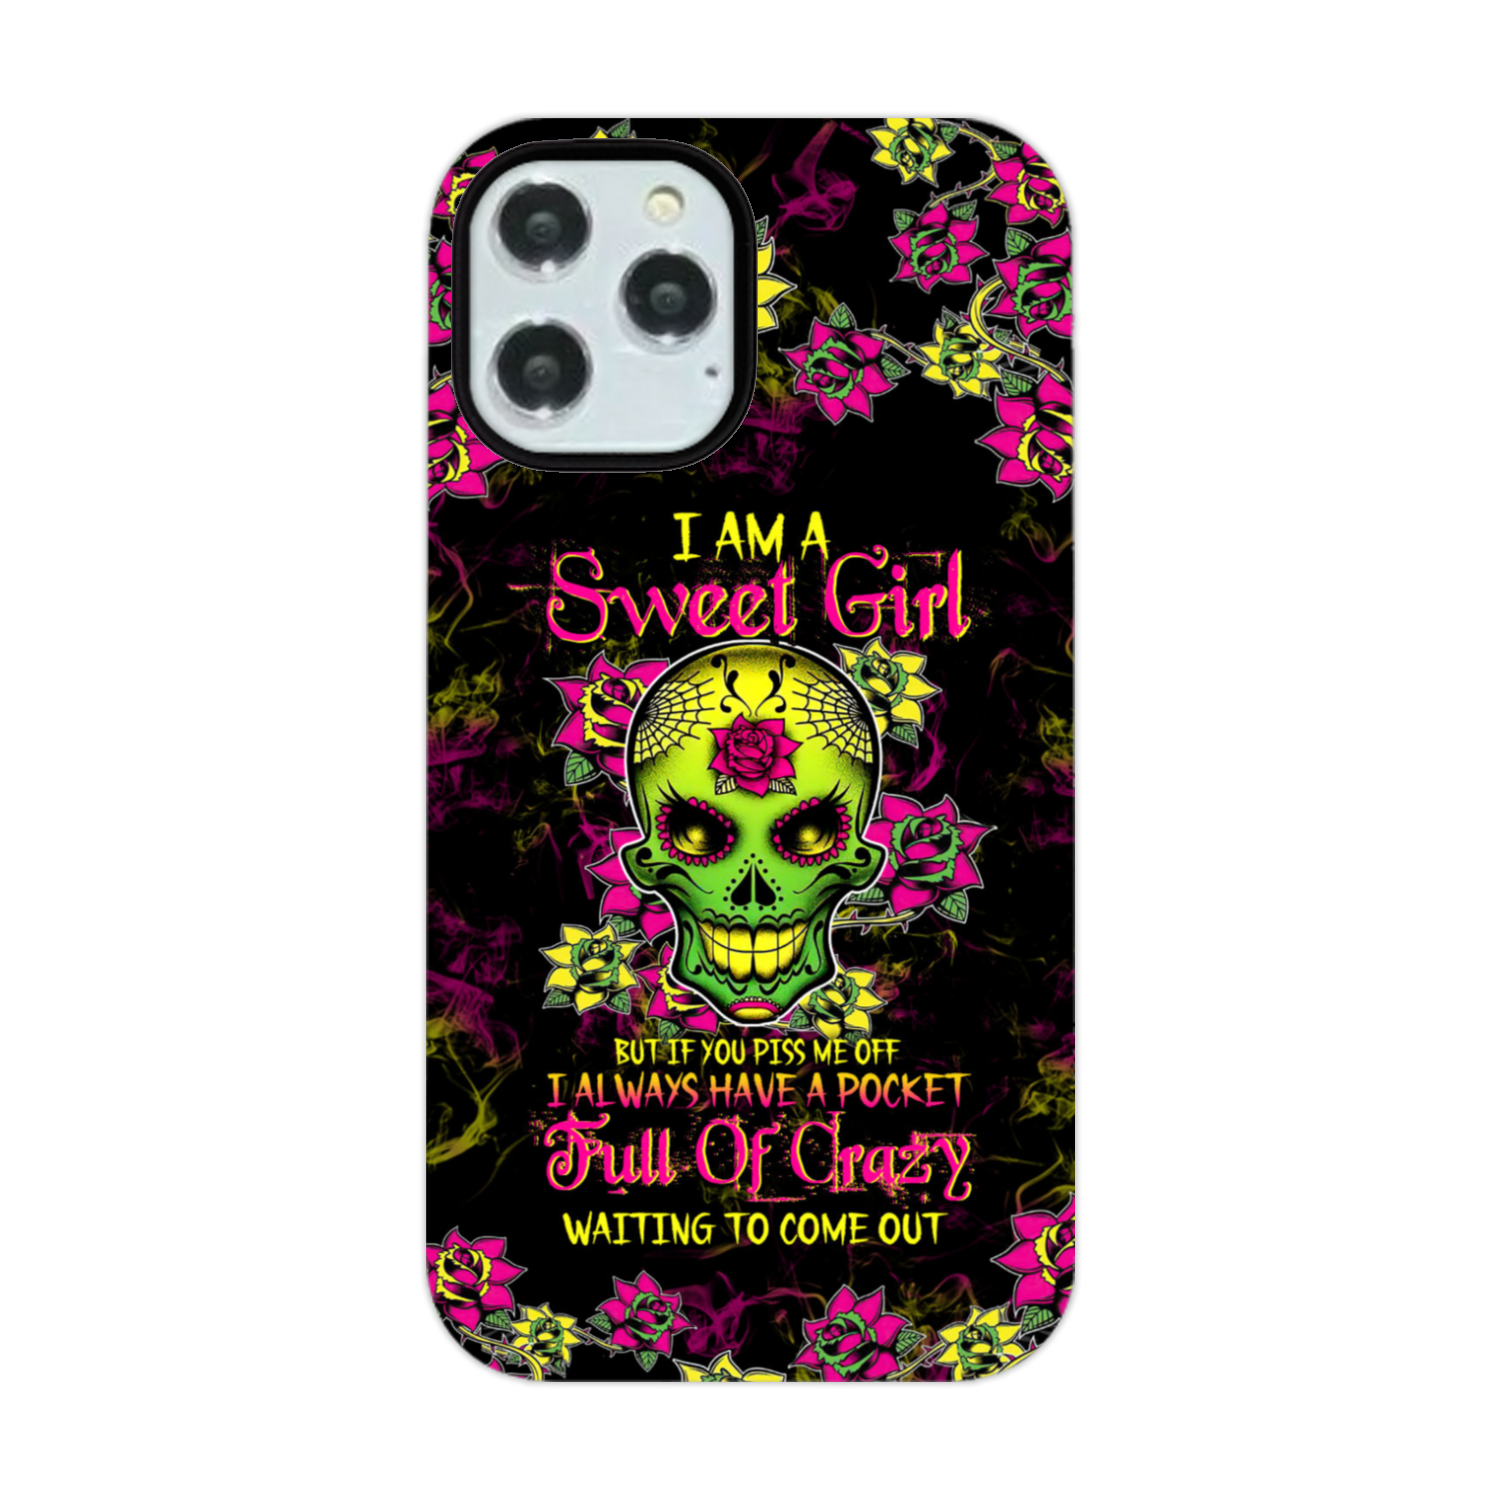 I AM A SWEET GIRL BUT IF YOU PISS ME OFF SUGAR SKULL PHONE CASE - TLTW1412224